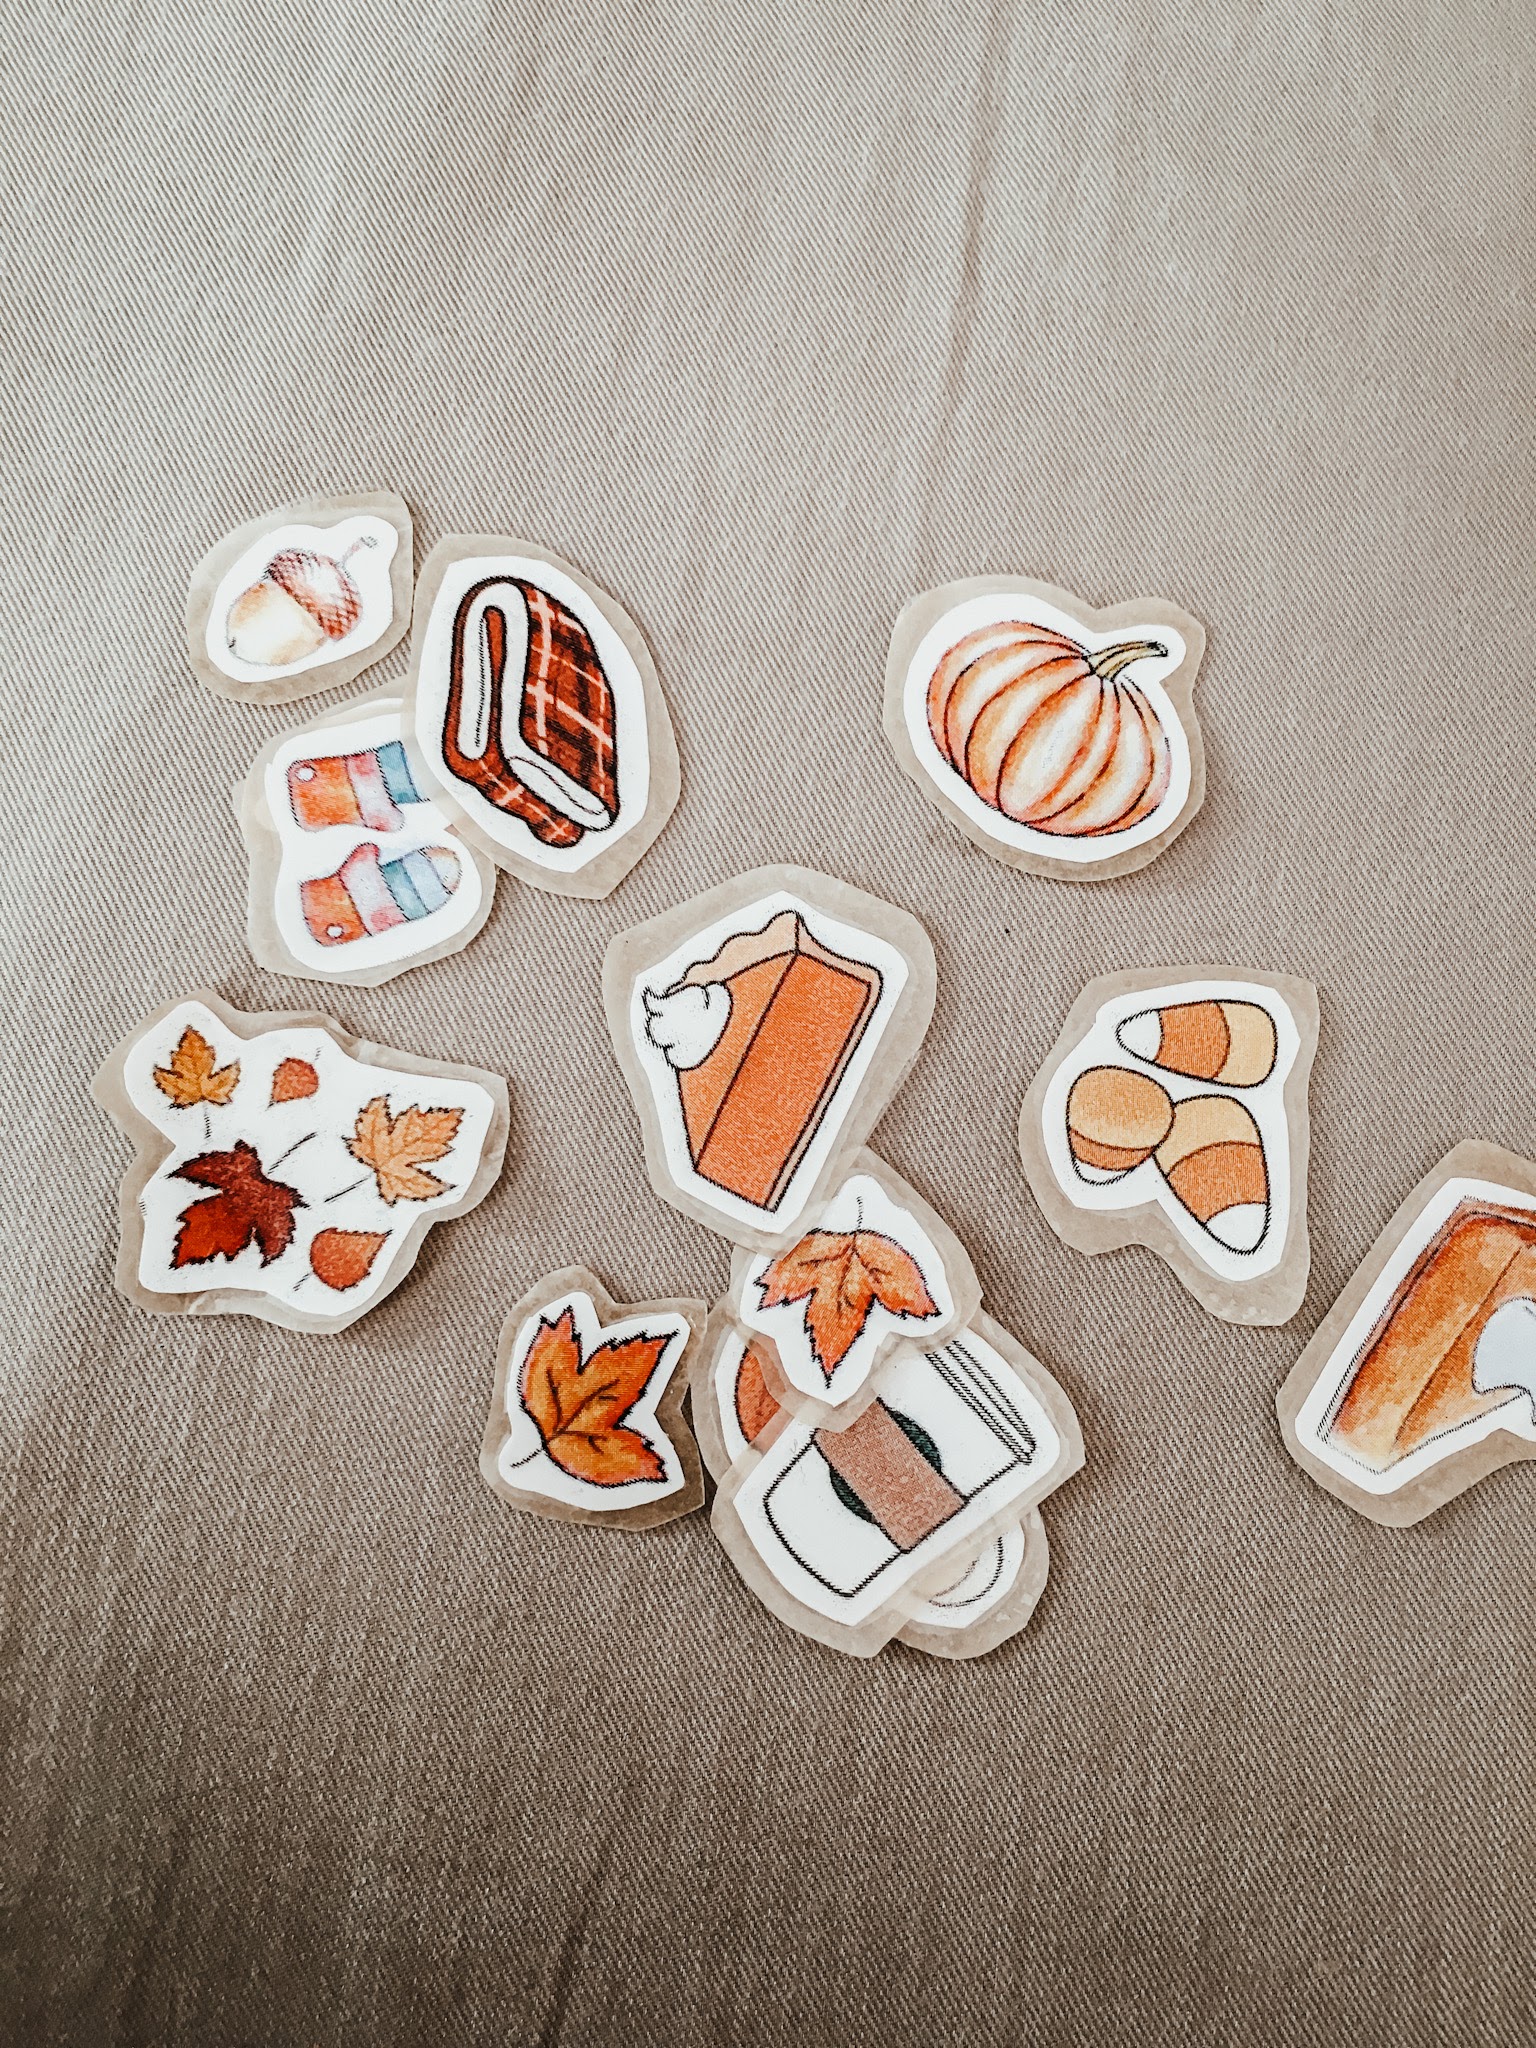 Homemade stickers – The Writer of Letters